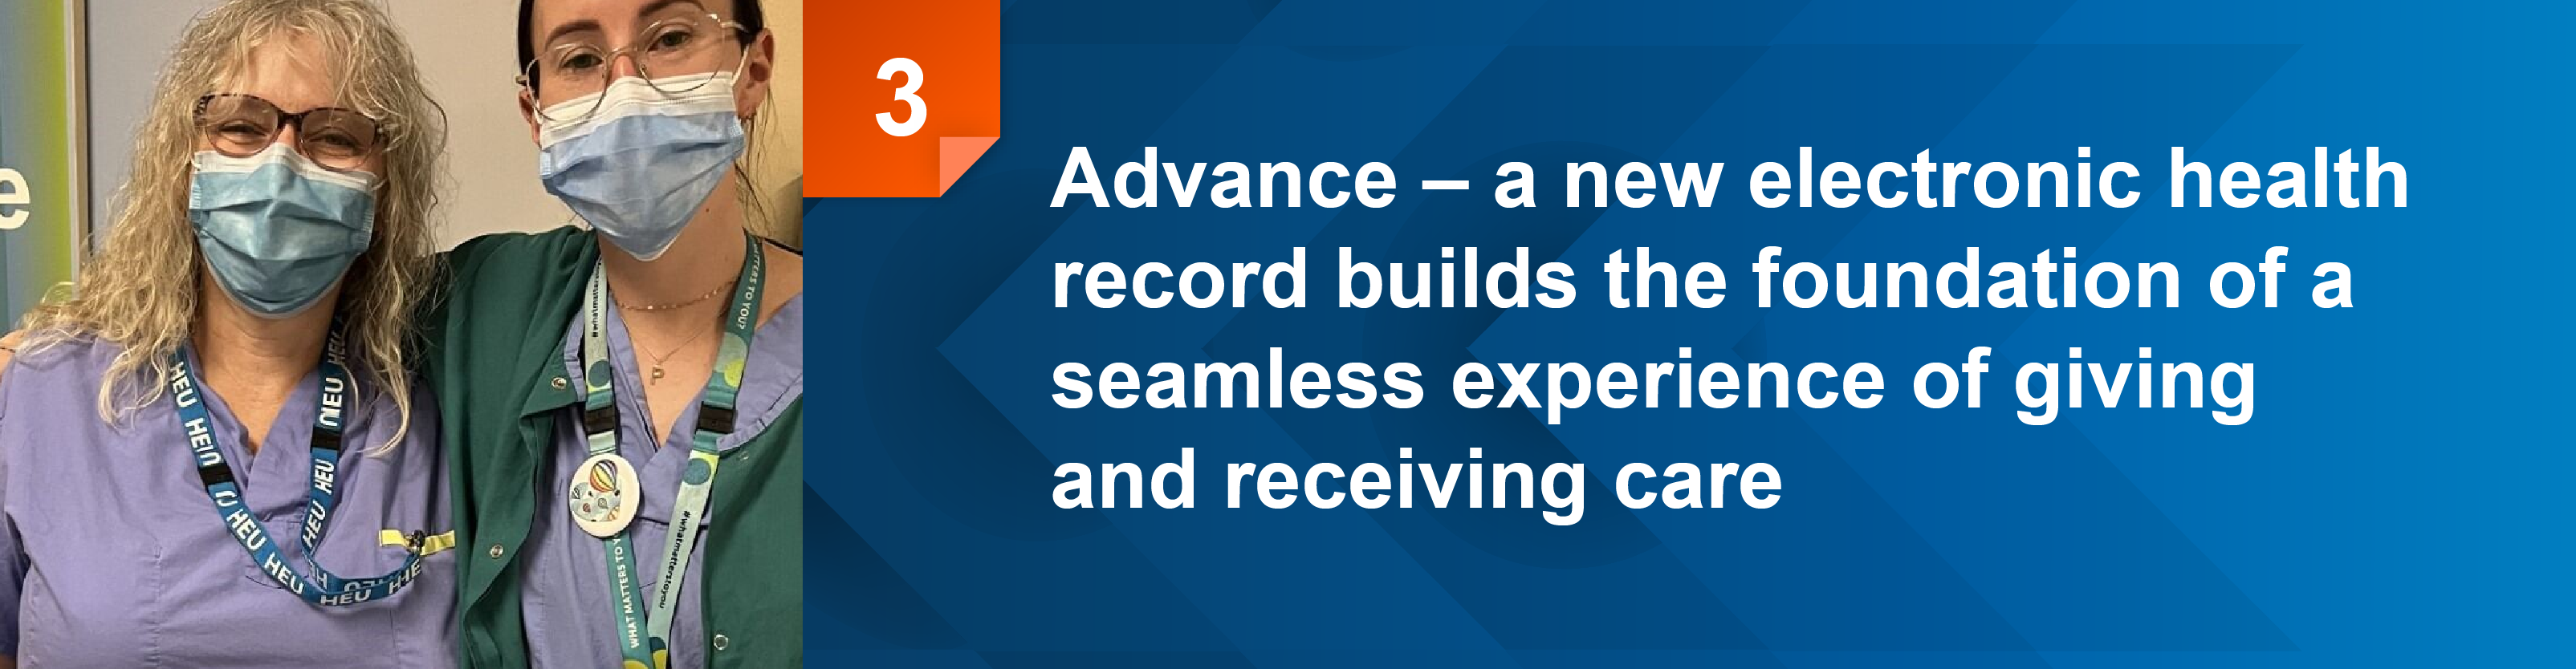 Advance is a new electronic health record that builds the foundation of a seamless experience of giving and receiving care